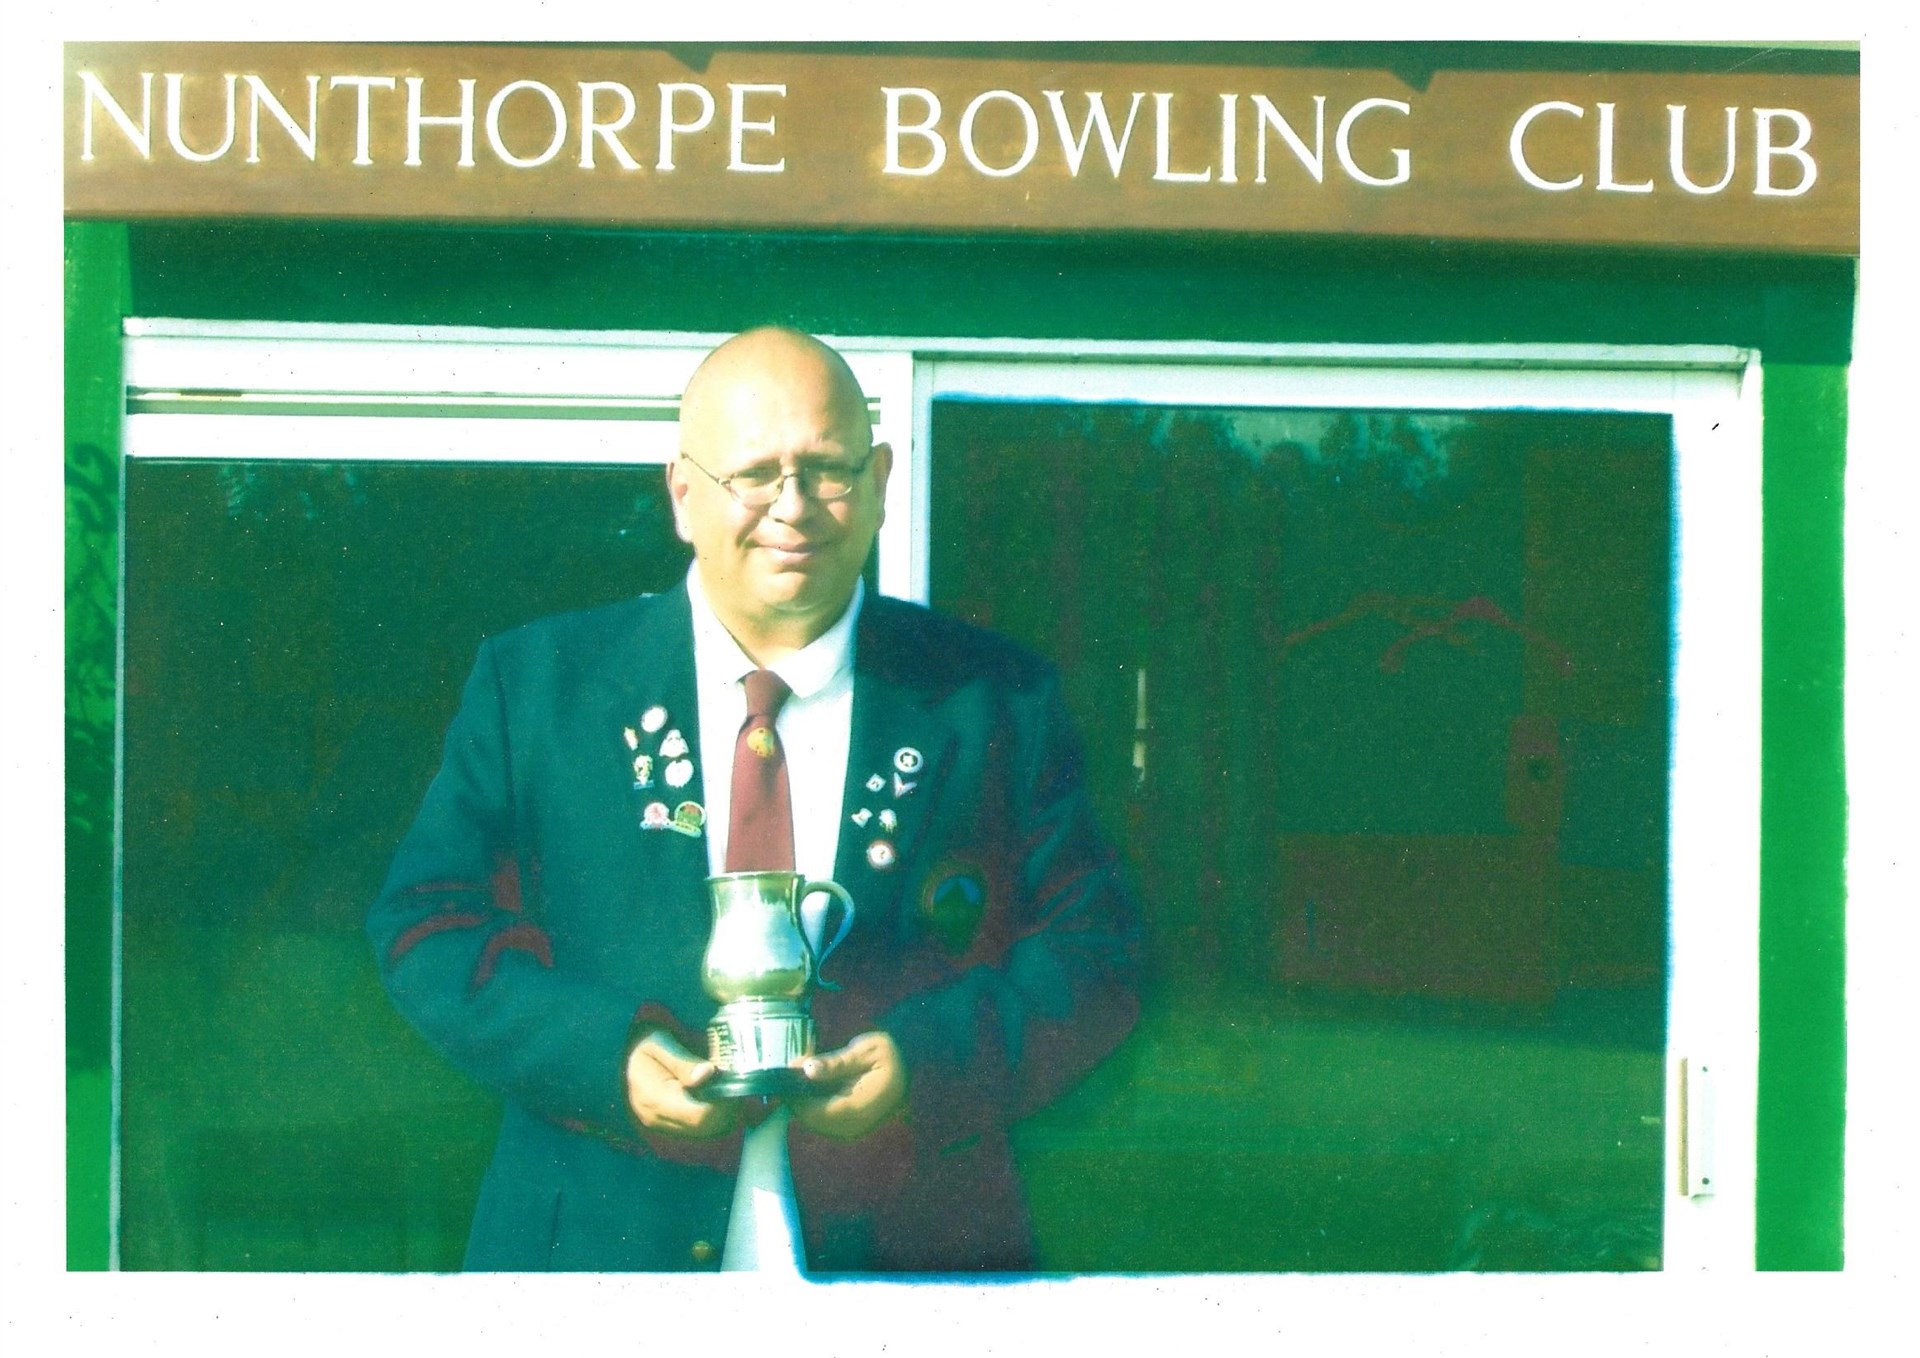 Nunthorpe Bowling Club More photographs (some dated)